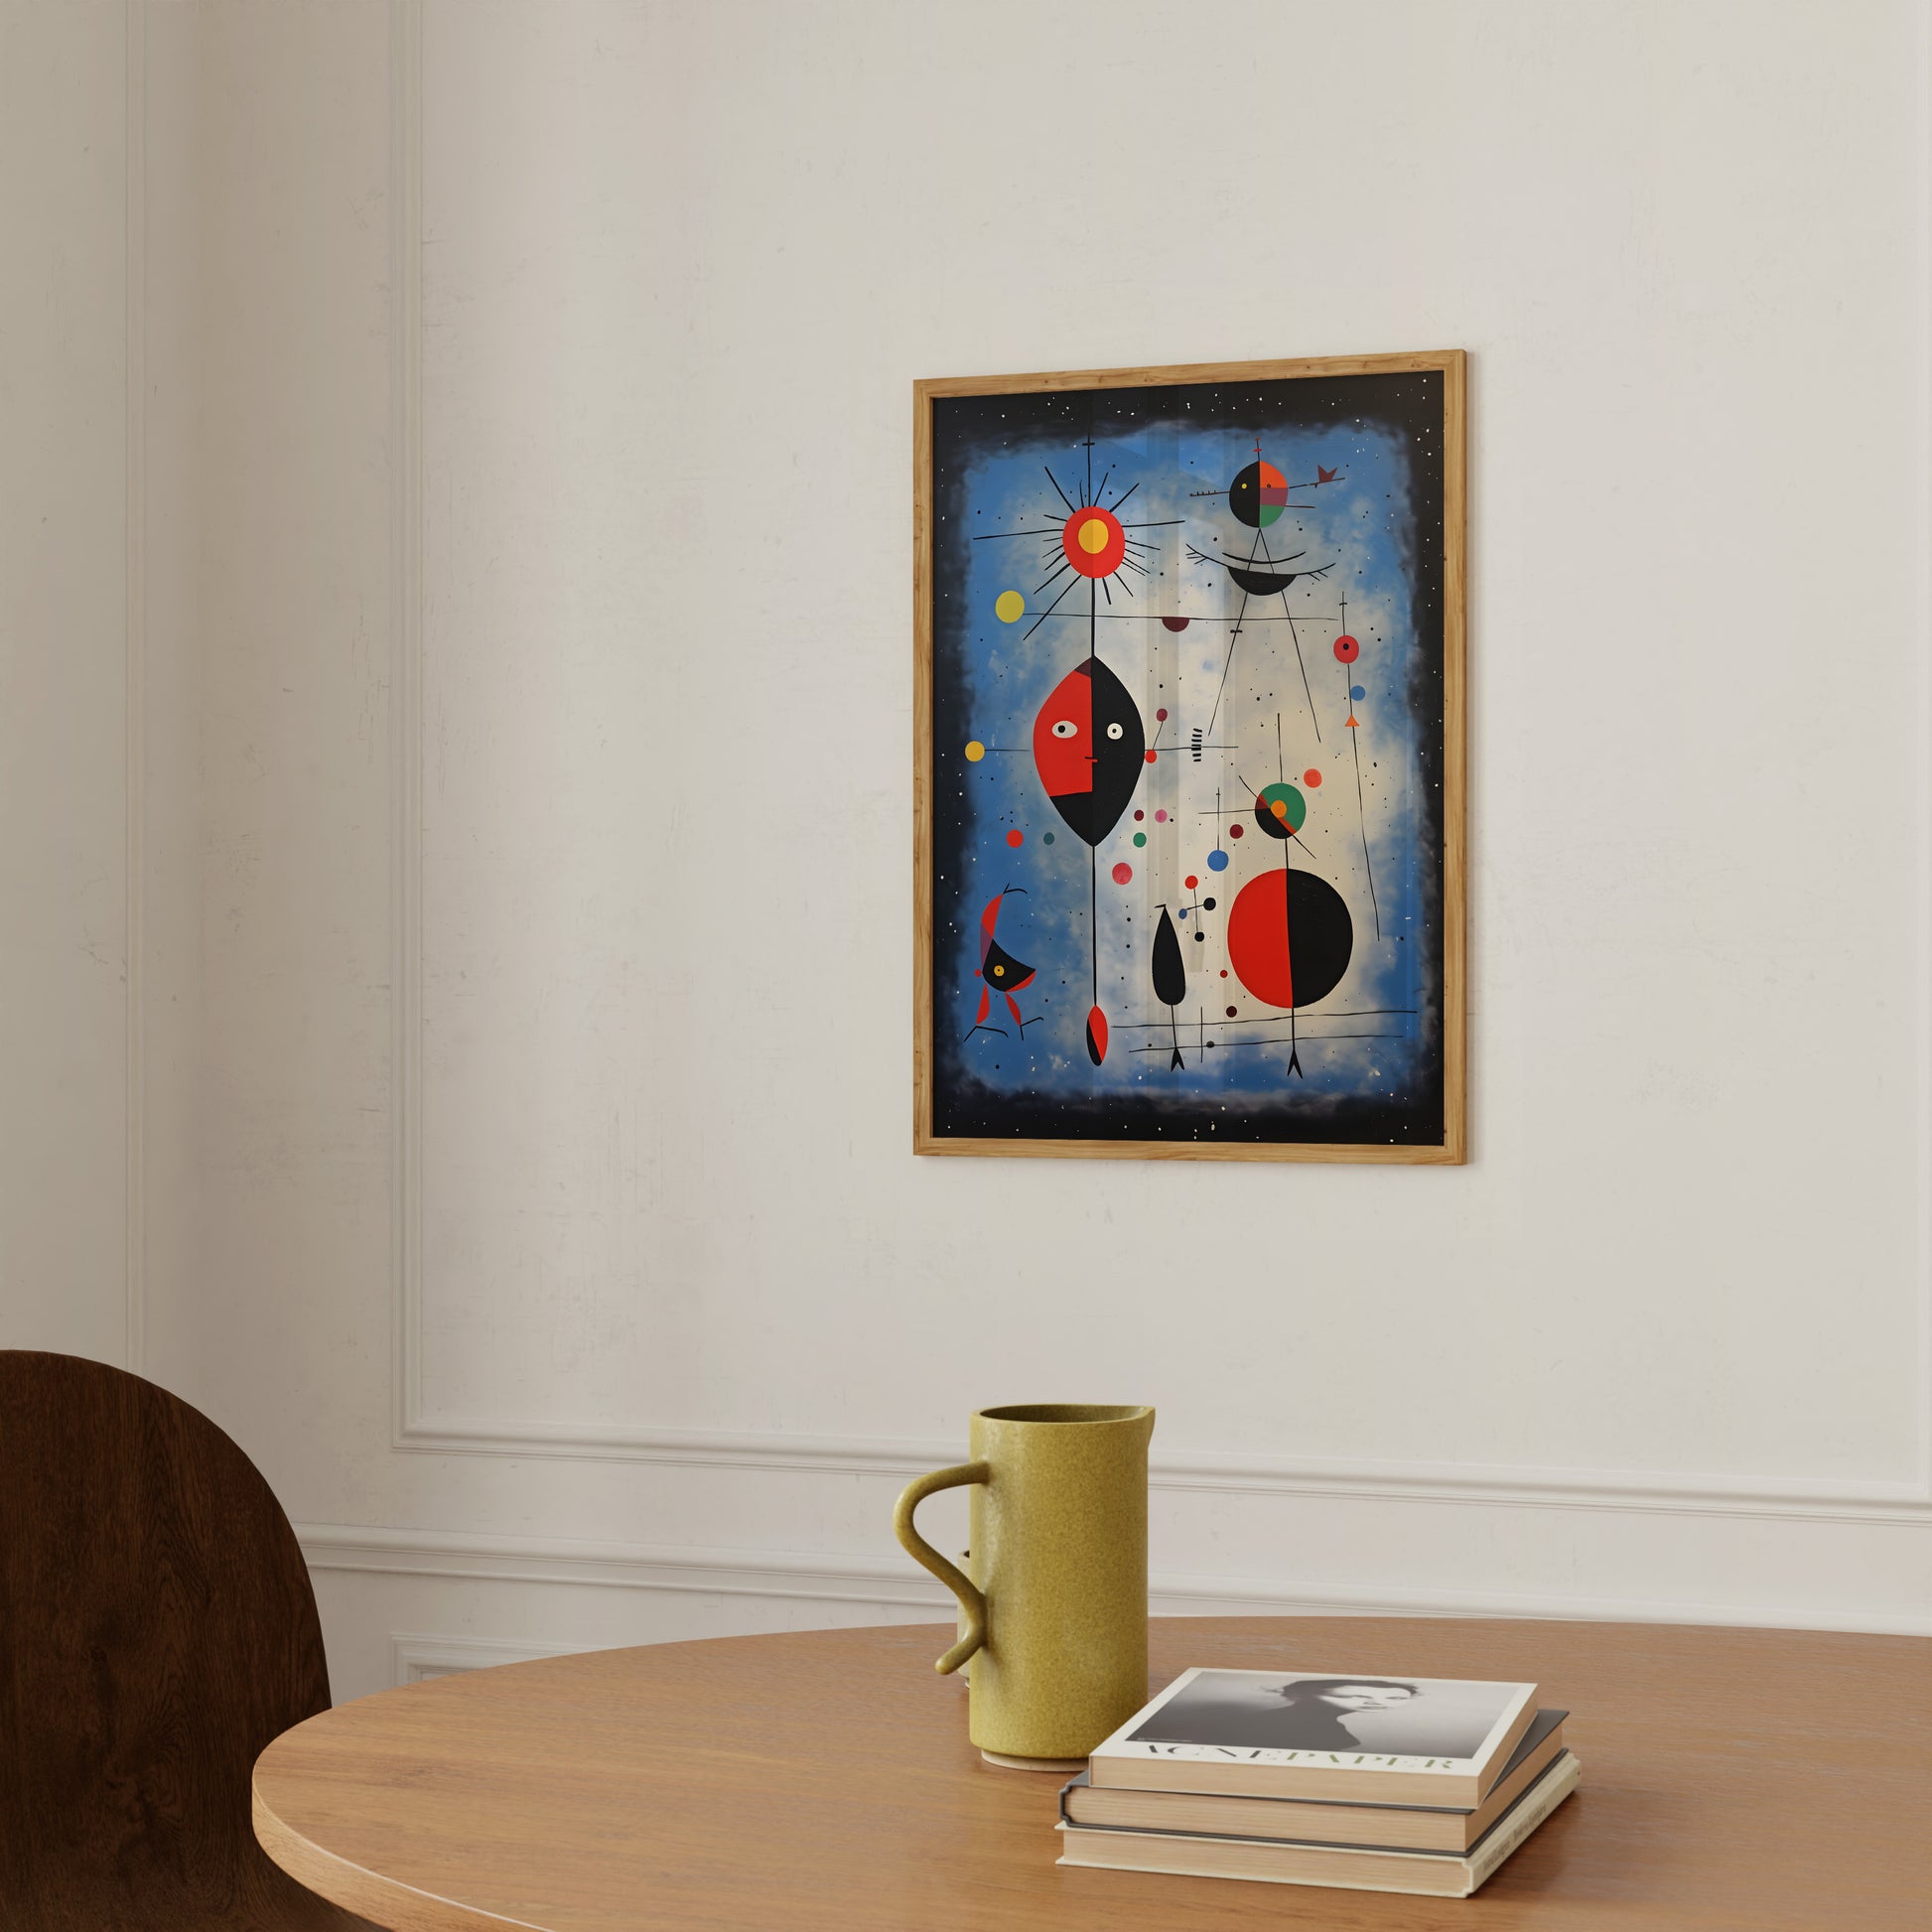 An abstract space-themed painting on a wall above a table with a mug and books.